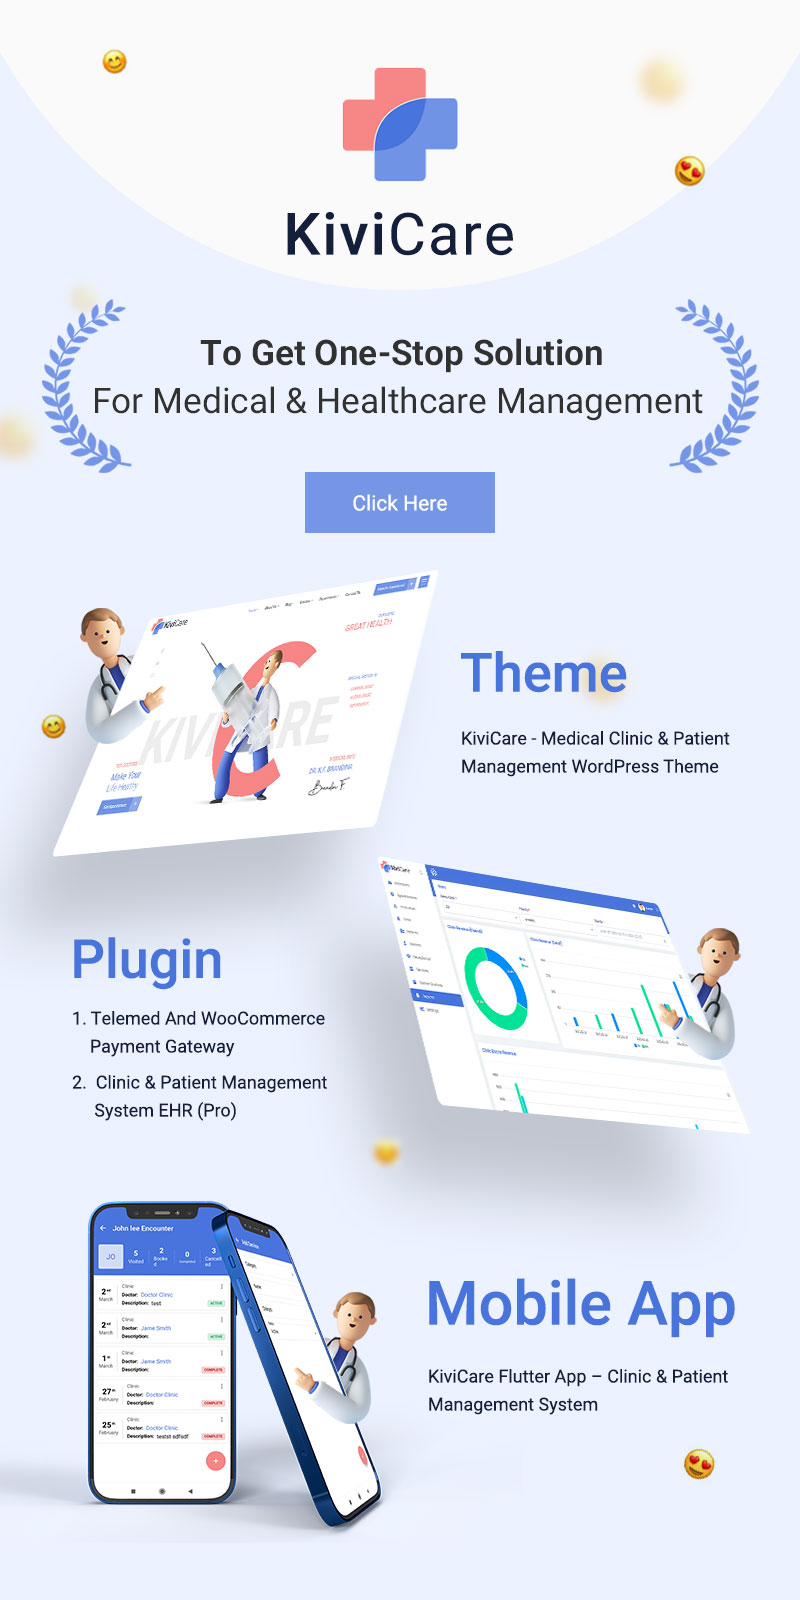 Kivicare Pro - Clinic & Patient Management System EHR (Add-on) - 6